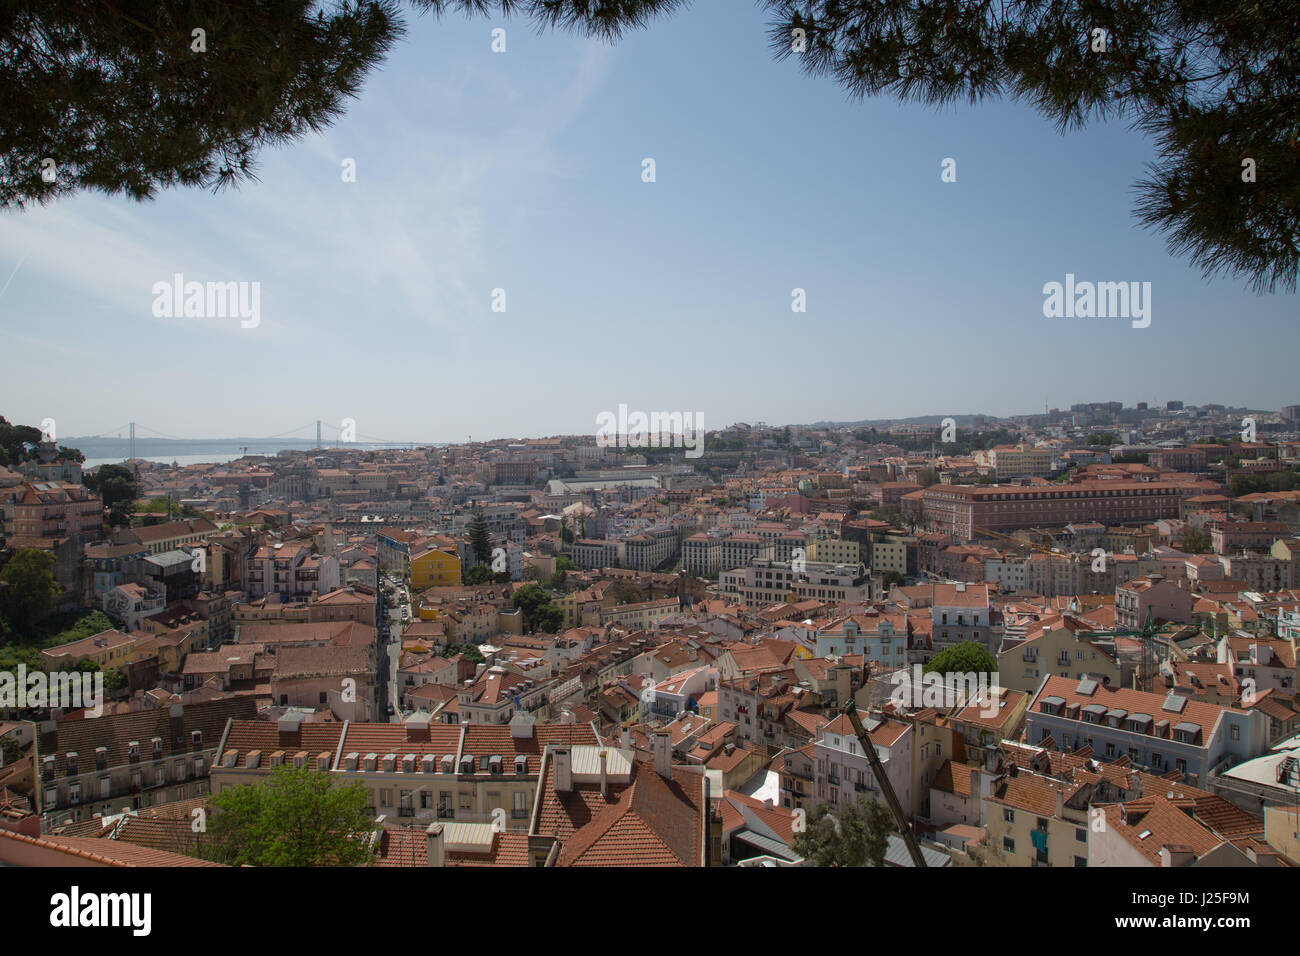 A view over the city of Lisbon, Portugal. Stock Photo